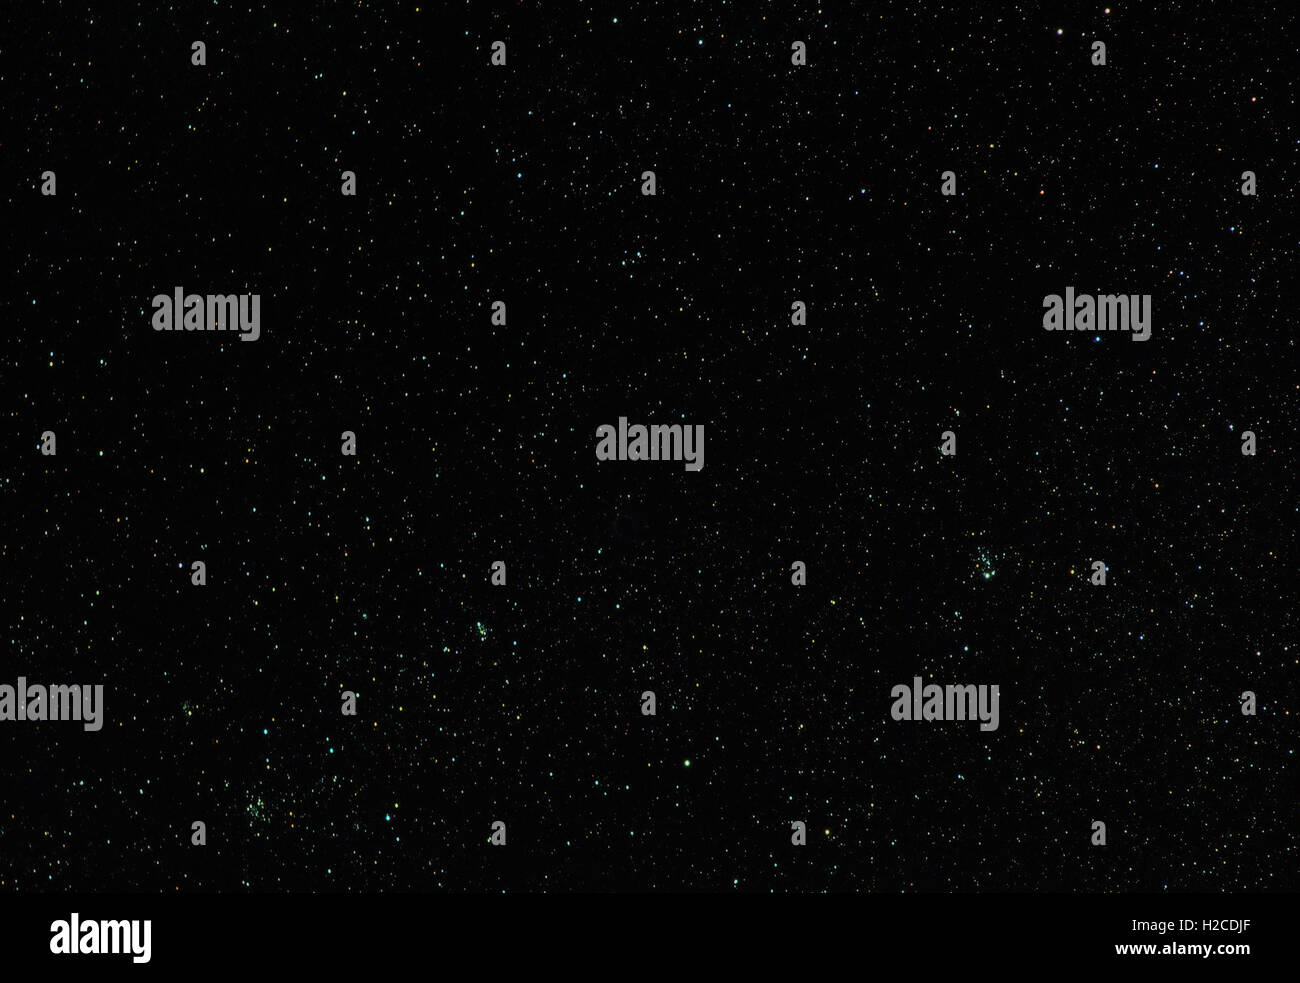 Abstract astronomy space universe background: black night sky with stars. Can be used as a wallpaper or backdrop. Stock Photo